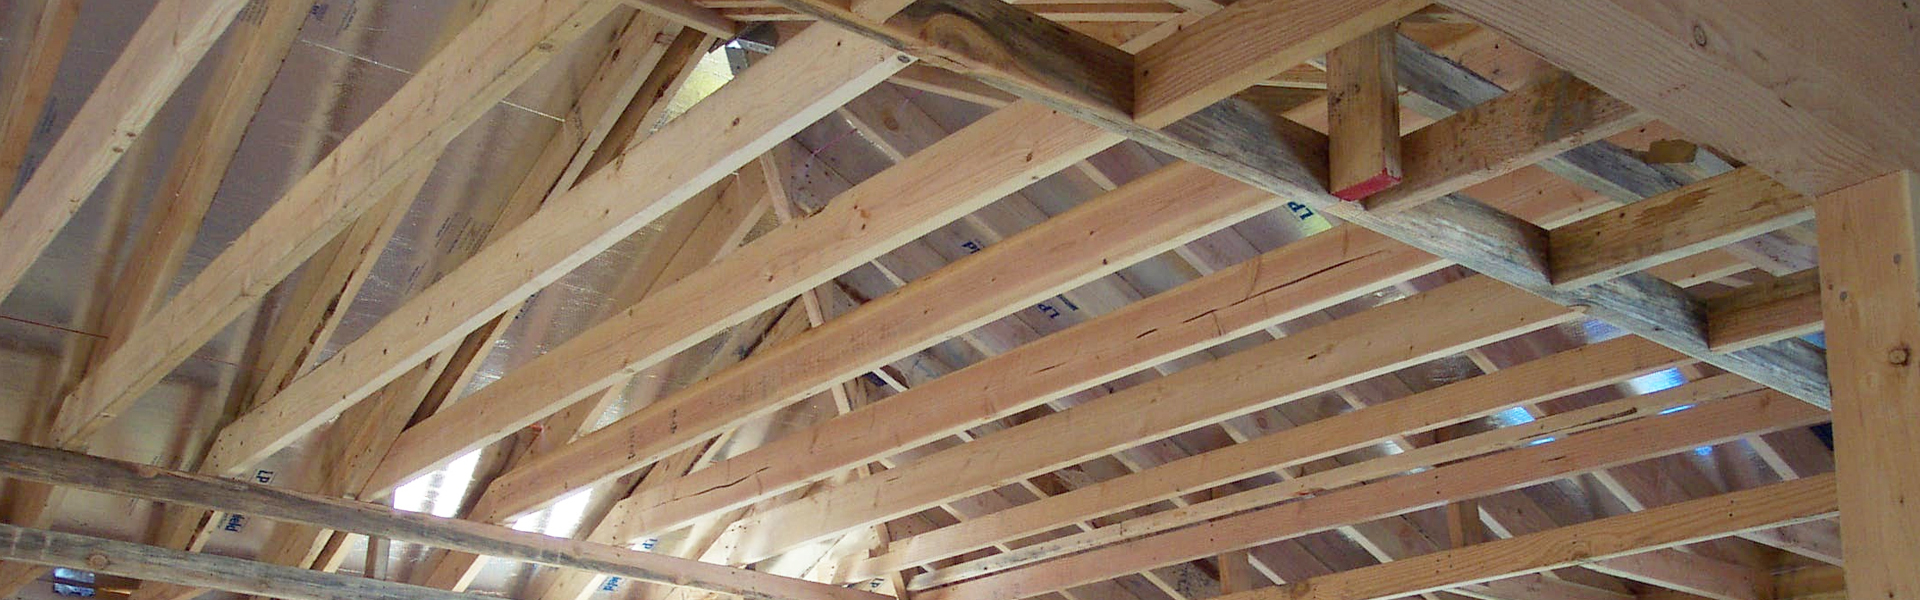 Rafter And Ceiling Joist Framing Icc